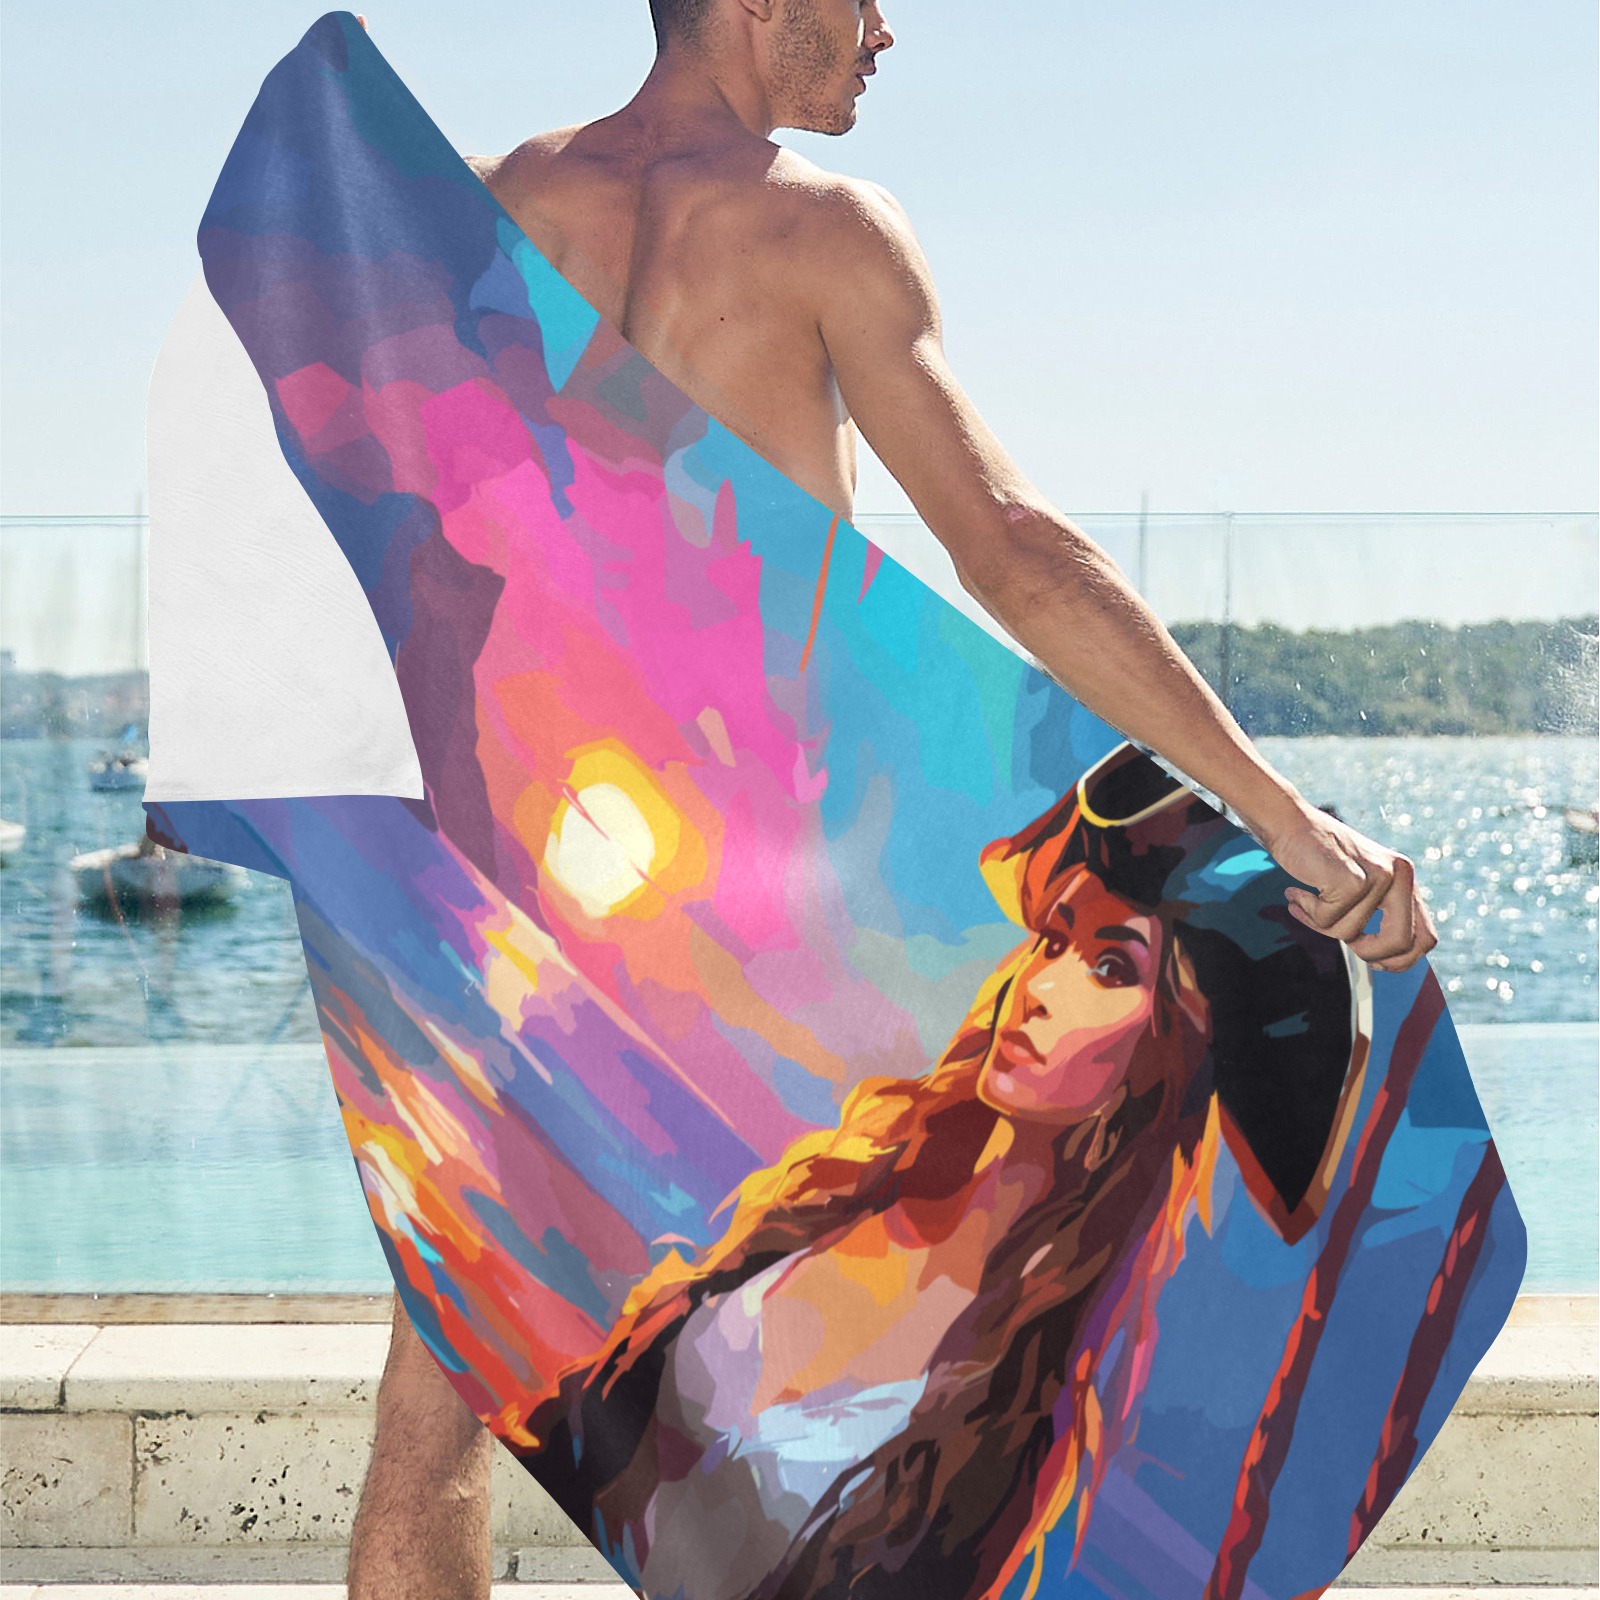 Pirate girl dreaming by the ocean at purple sunset Beach Towel 32"x 71"